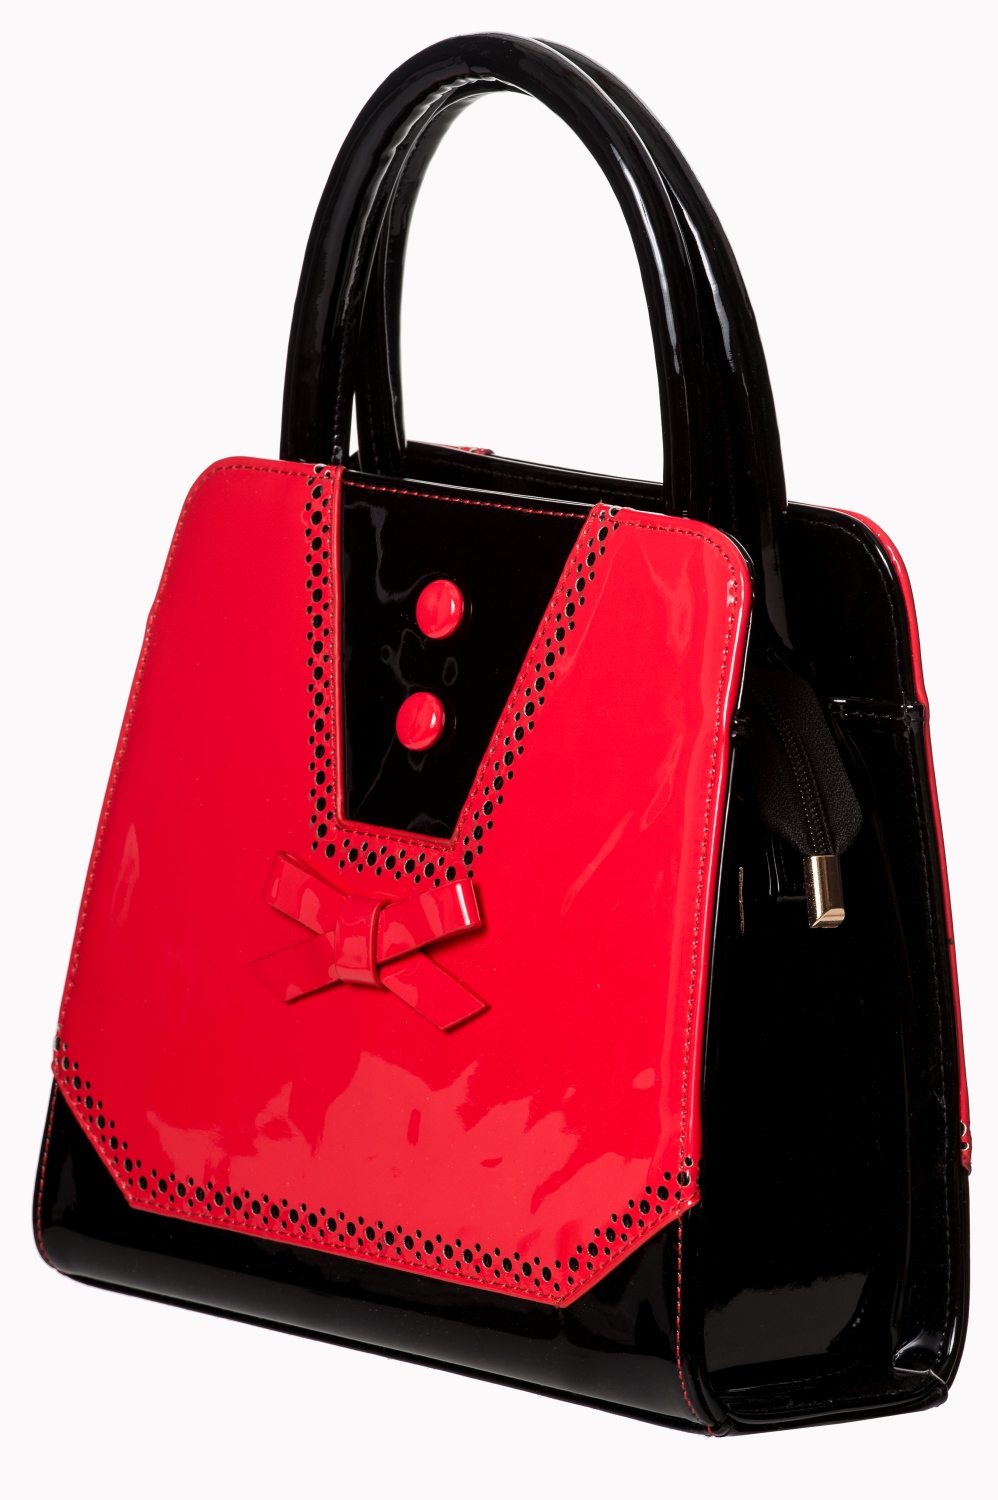 Luxurious 50s Red Black Patent Rockabilly Tote Bag